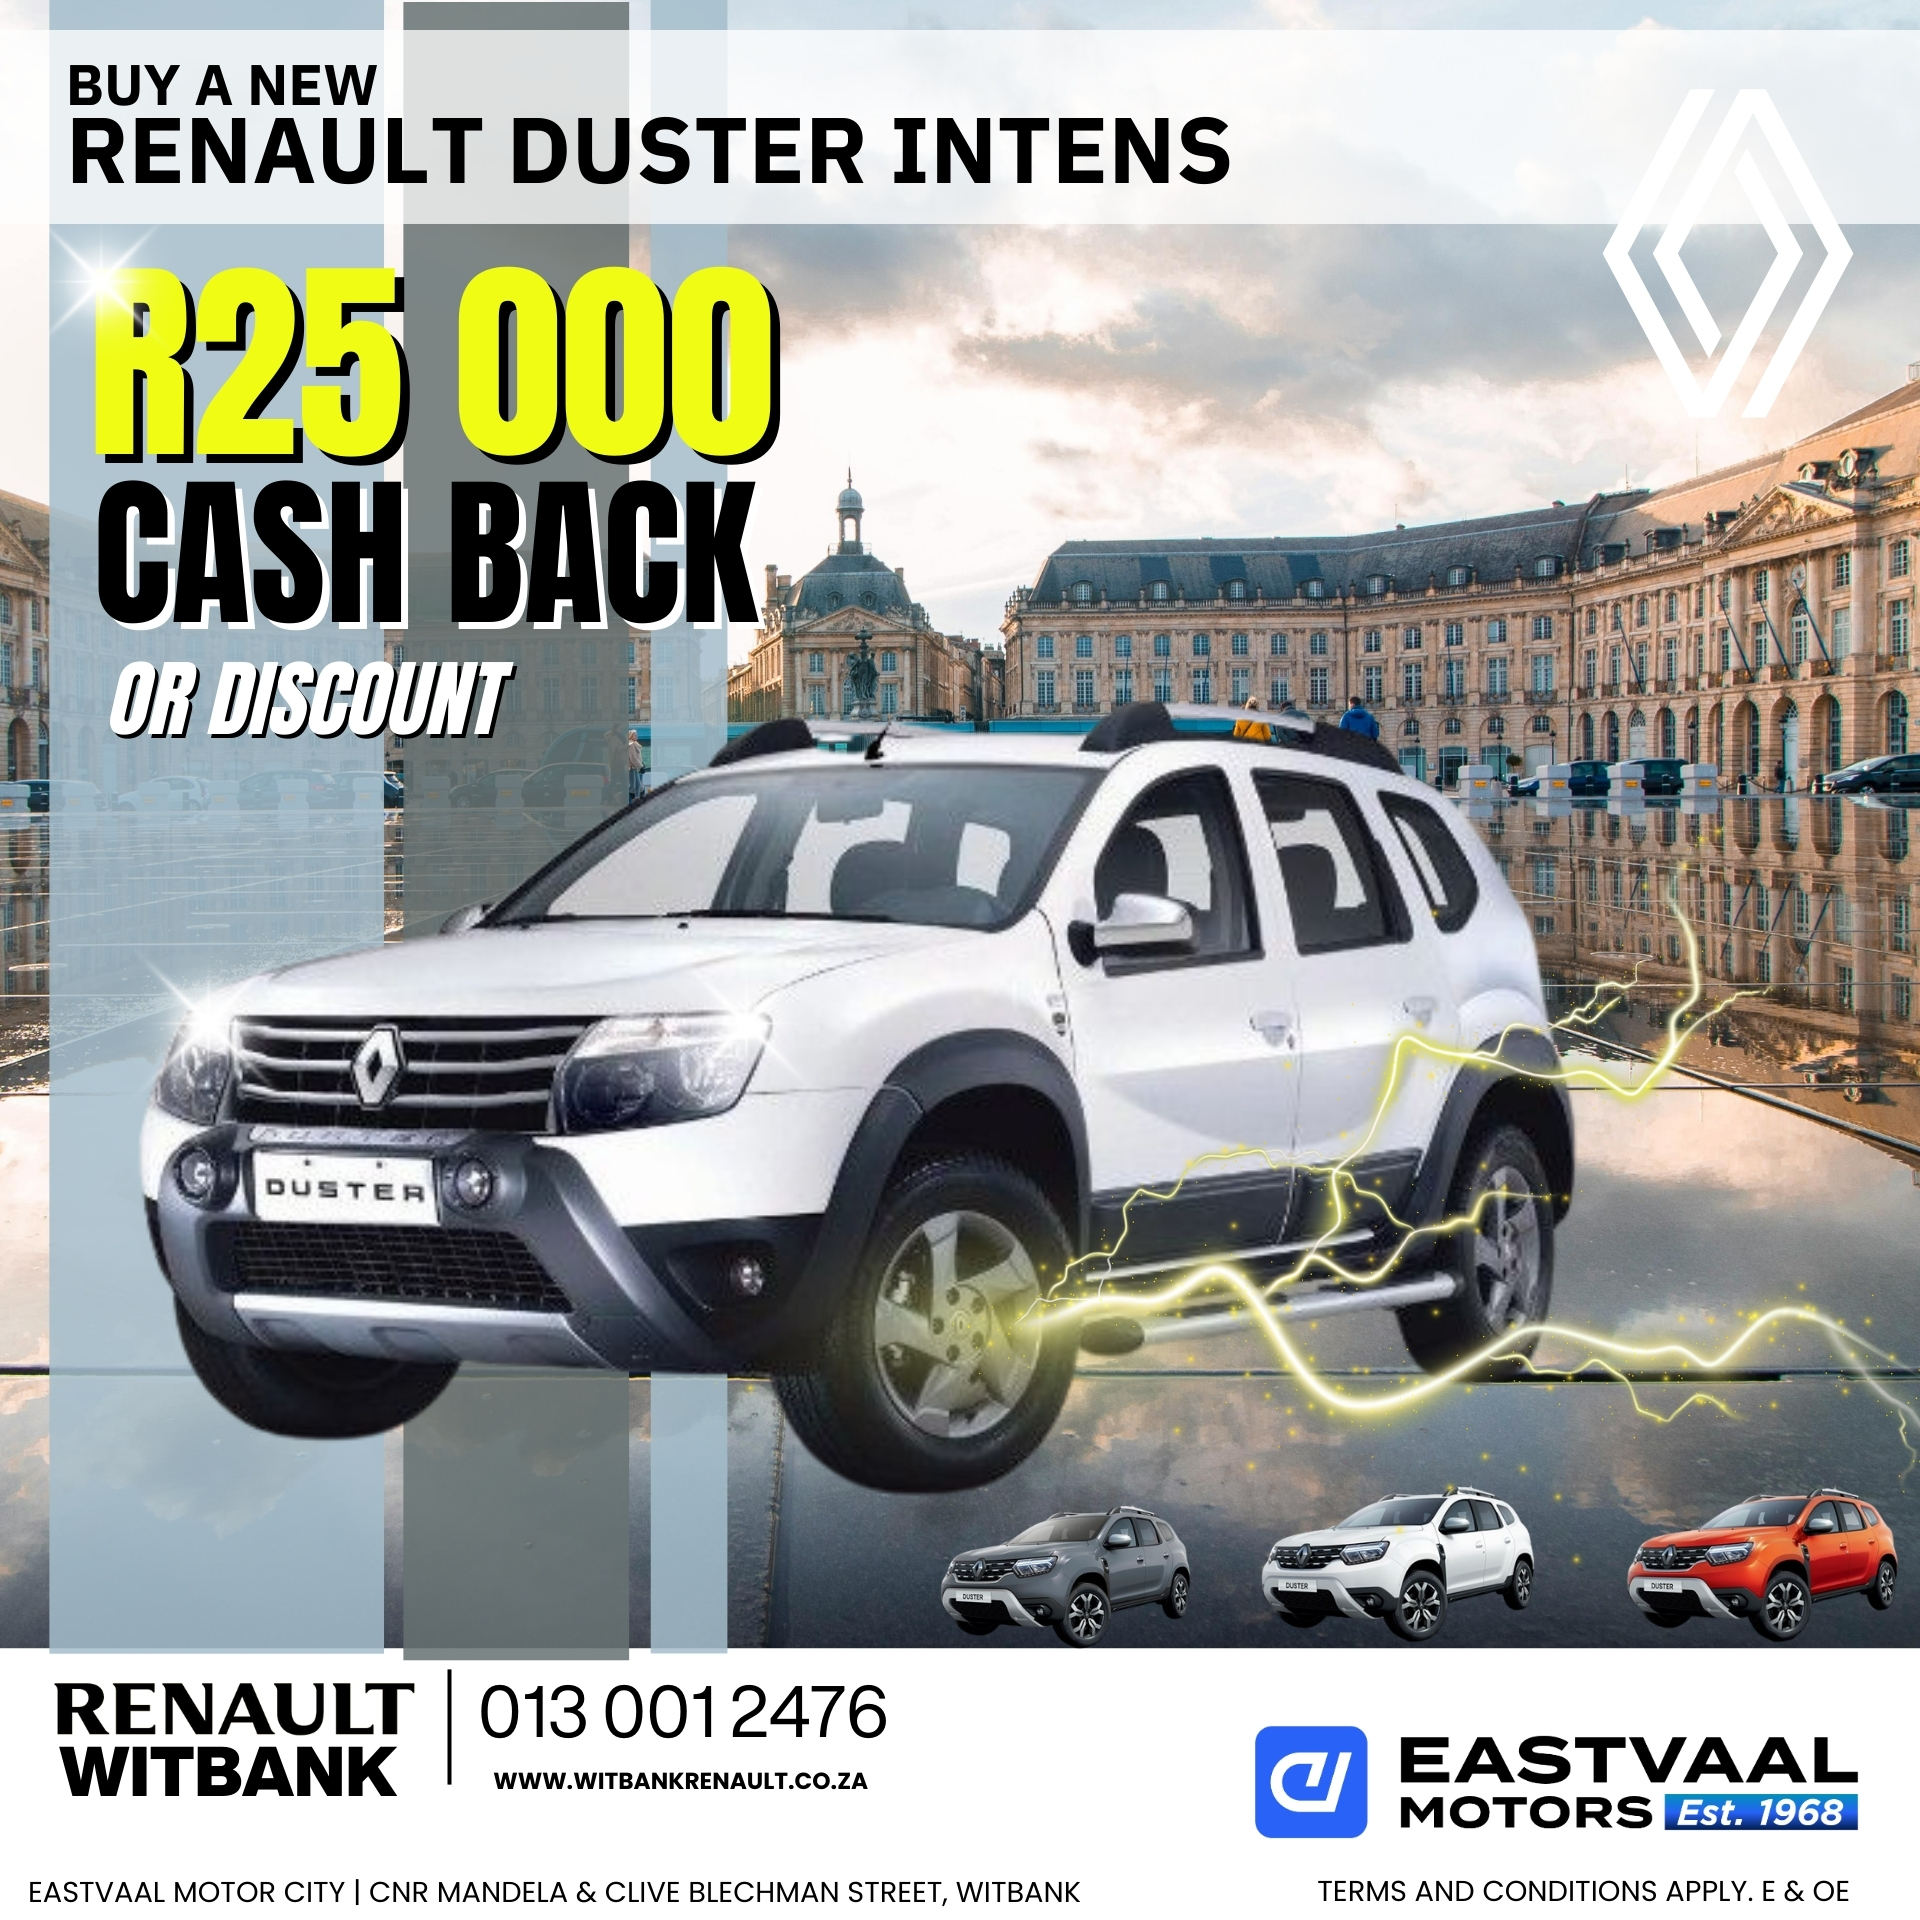 Upgrade your ride this July with Renault! image from 